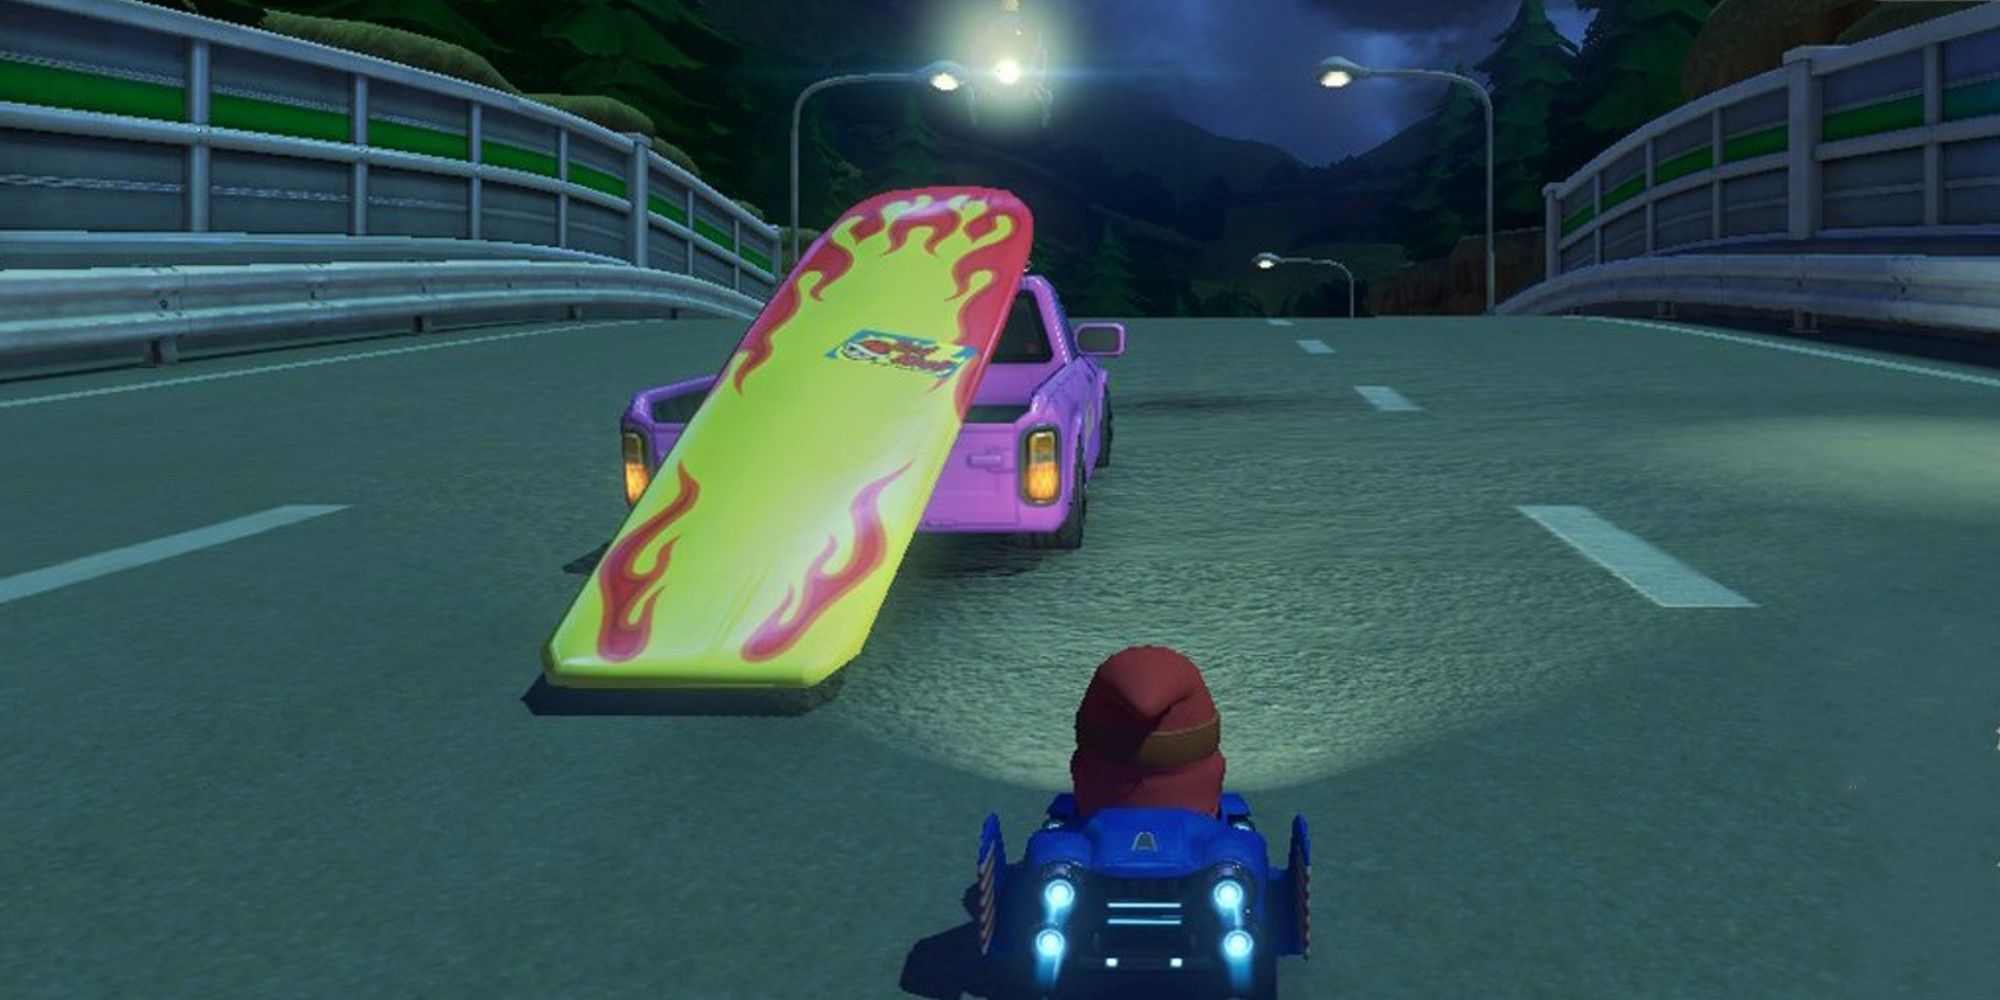 A pink truck carrying an oversized surfboard drives in front of Mario - Mario Kart 8